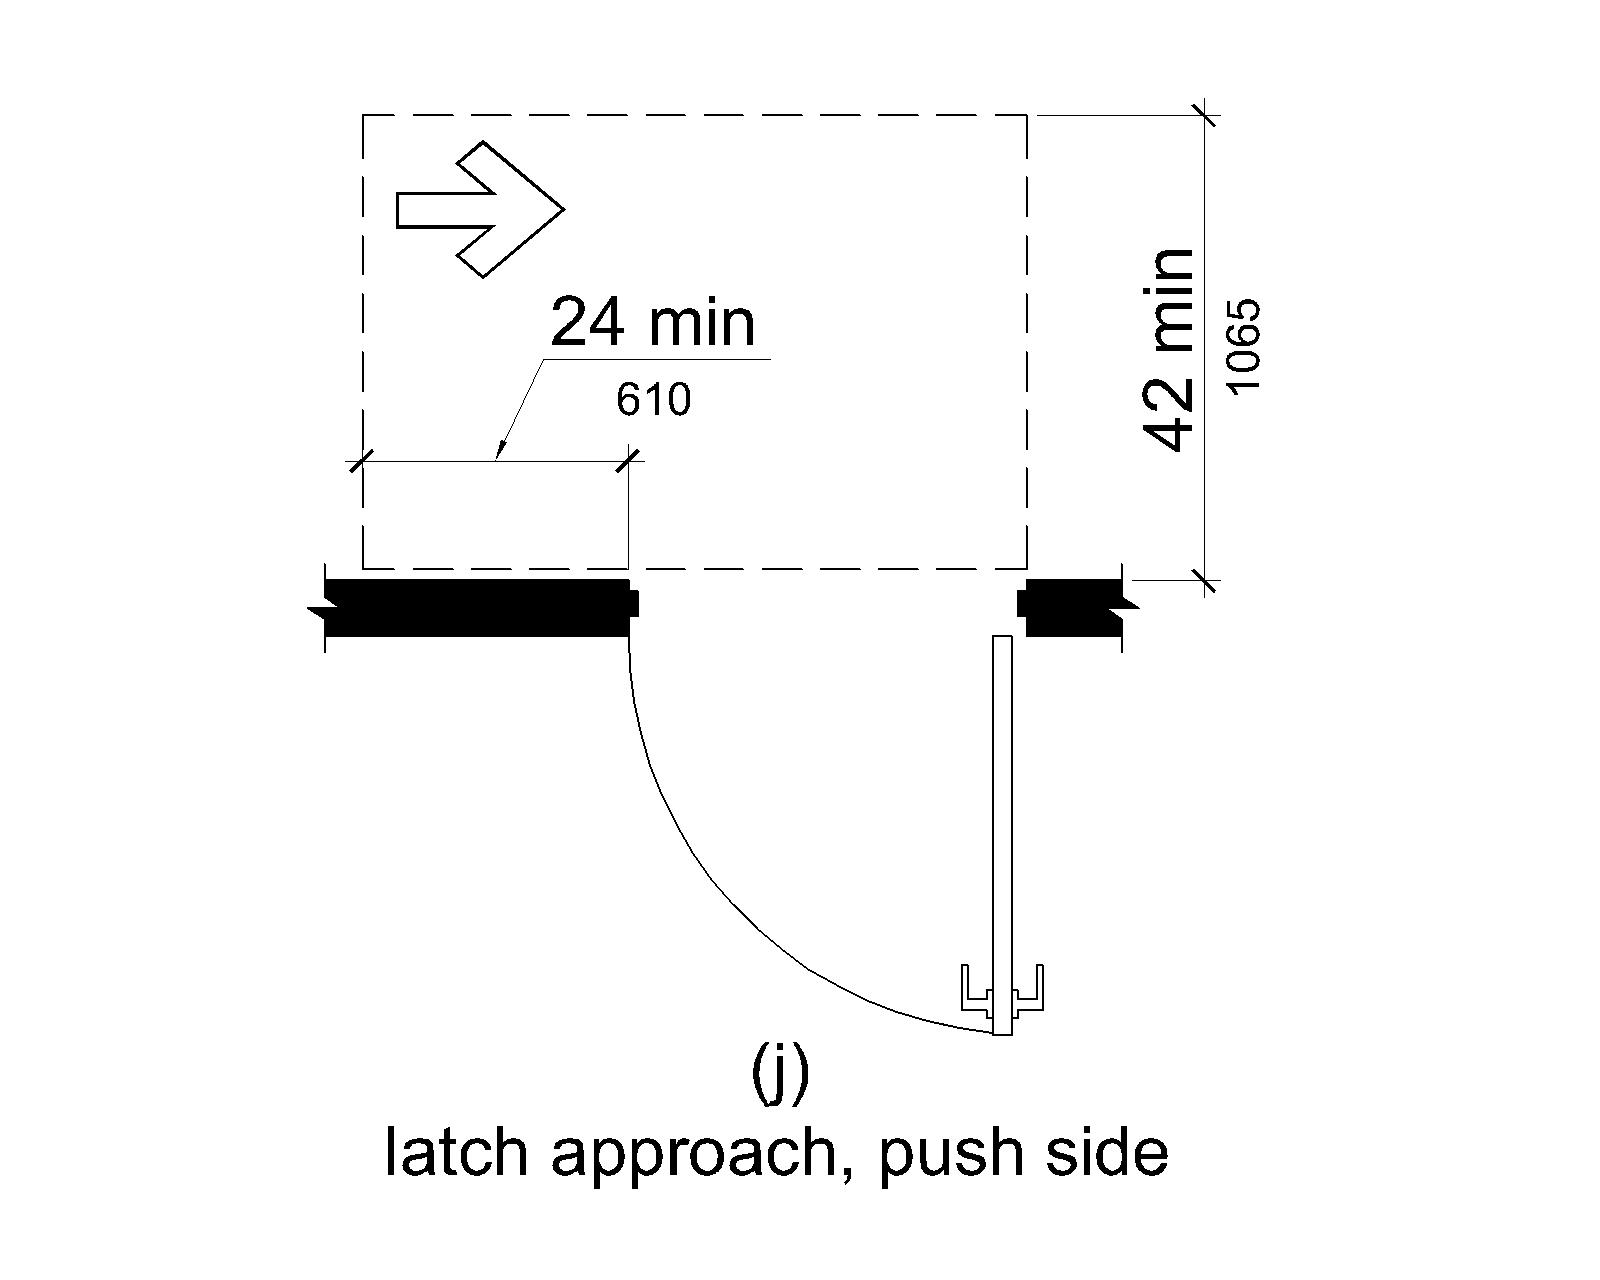 (j) On the push side, maneuvering space extends 24 inches (560 mm) from the latch side of the doorway and 42 inches (1065 mm) minimum perpendicular to the doorway if the door does not have both a closer and a latch.